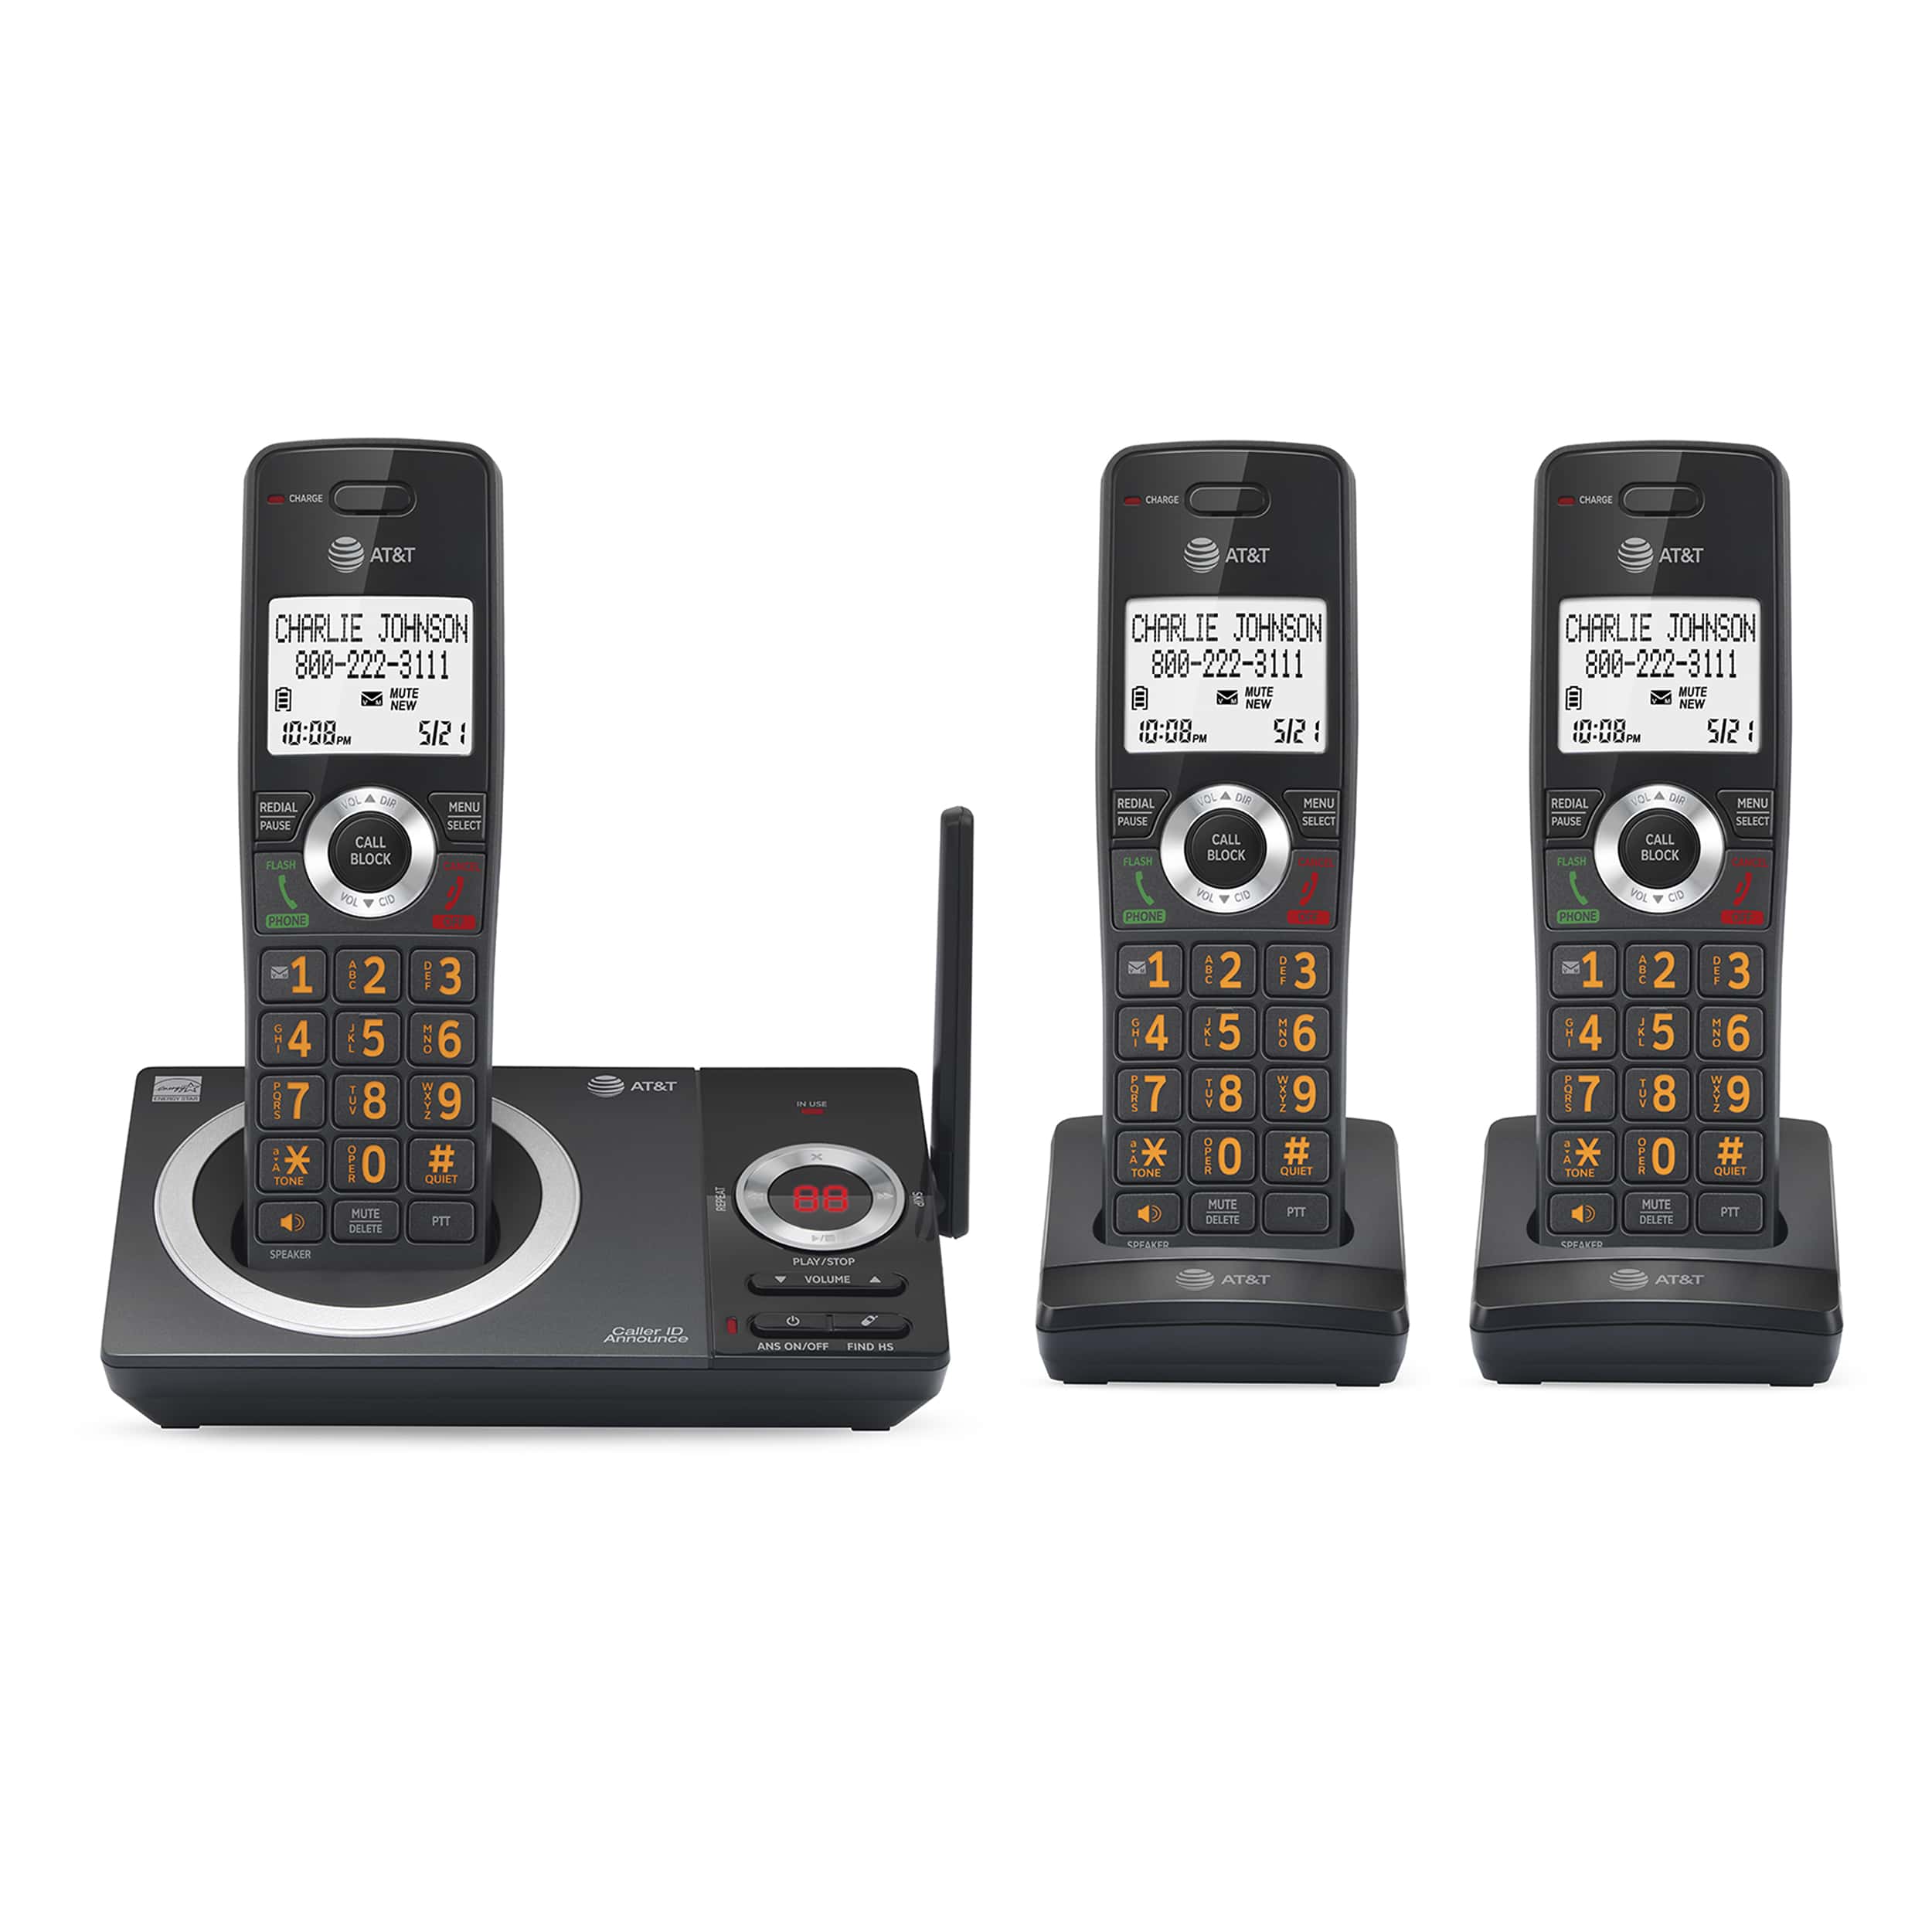 3-Handset Expandable Cordless Phone with Unsurpassed Range, Smart Call Blocker and Answering System - view 1